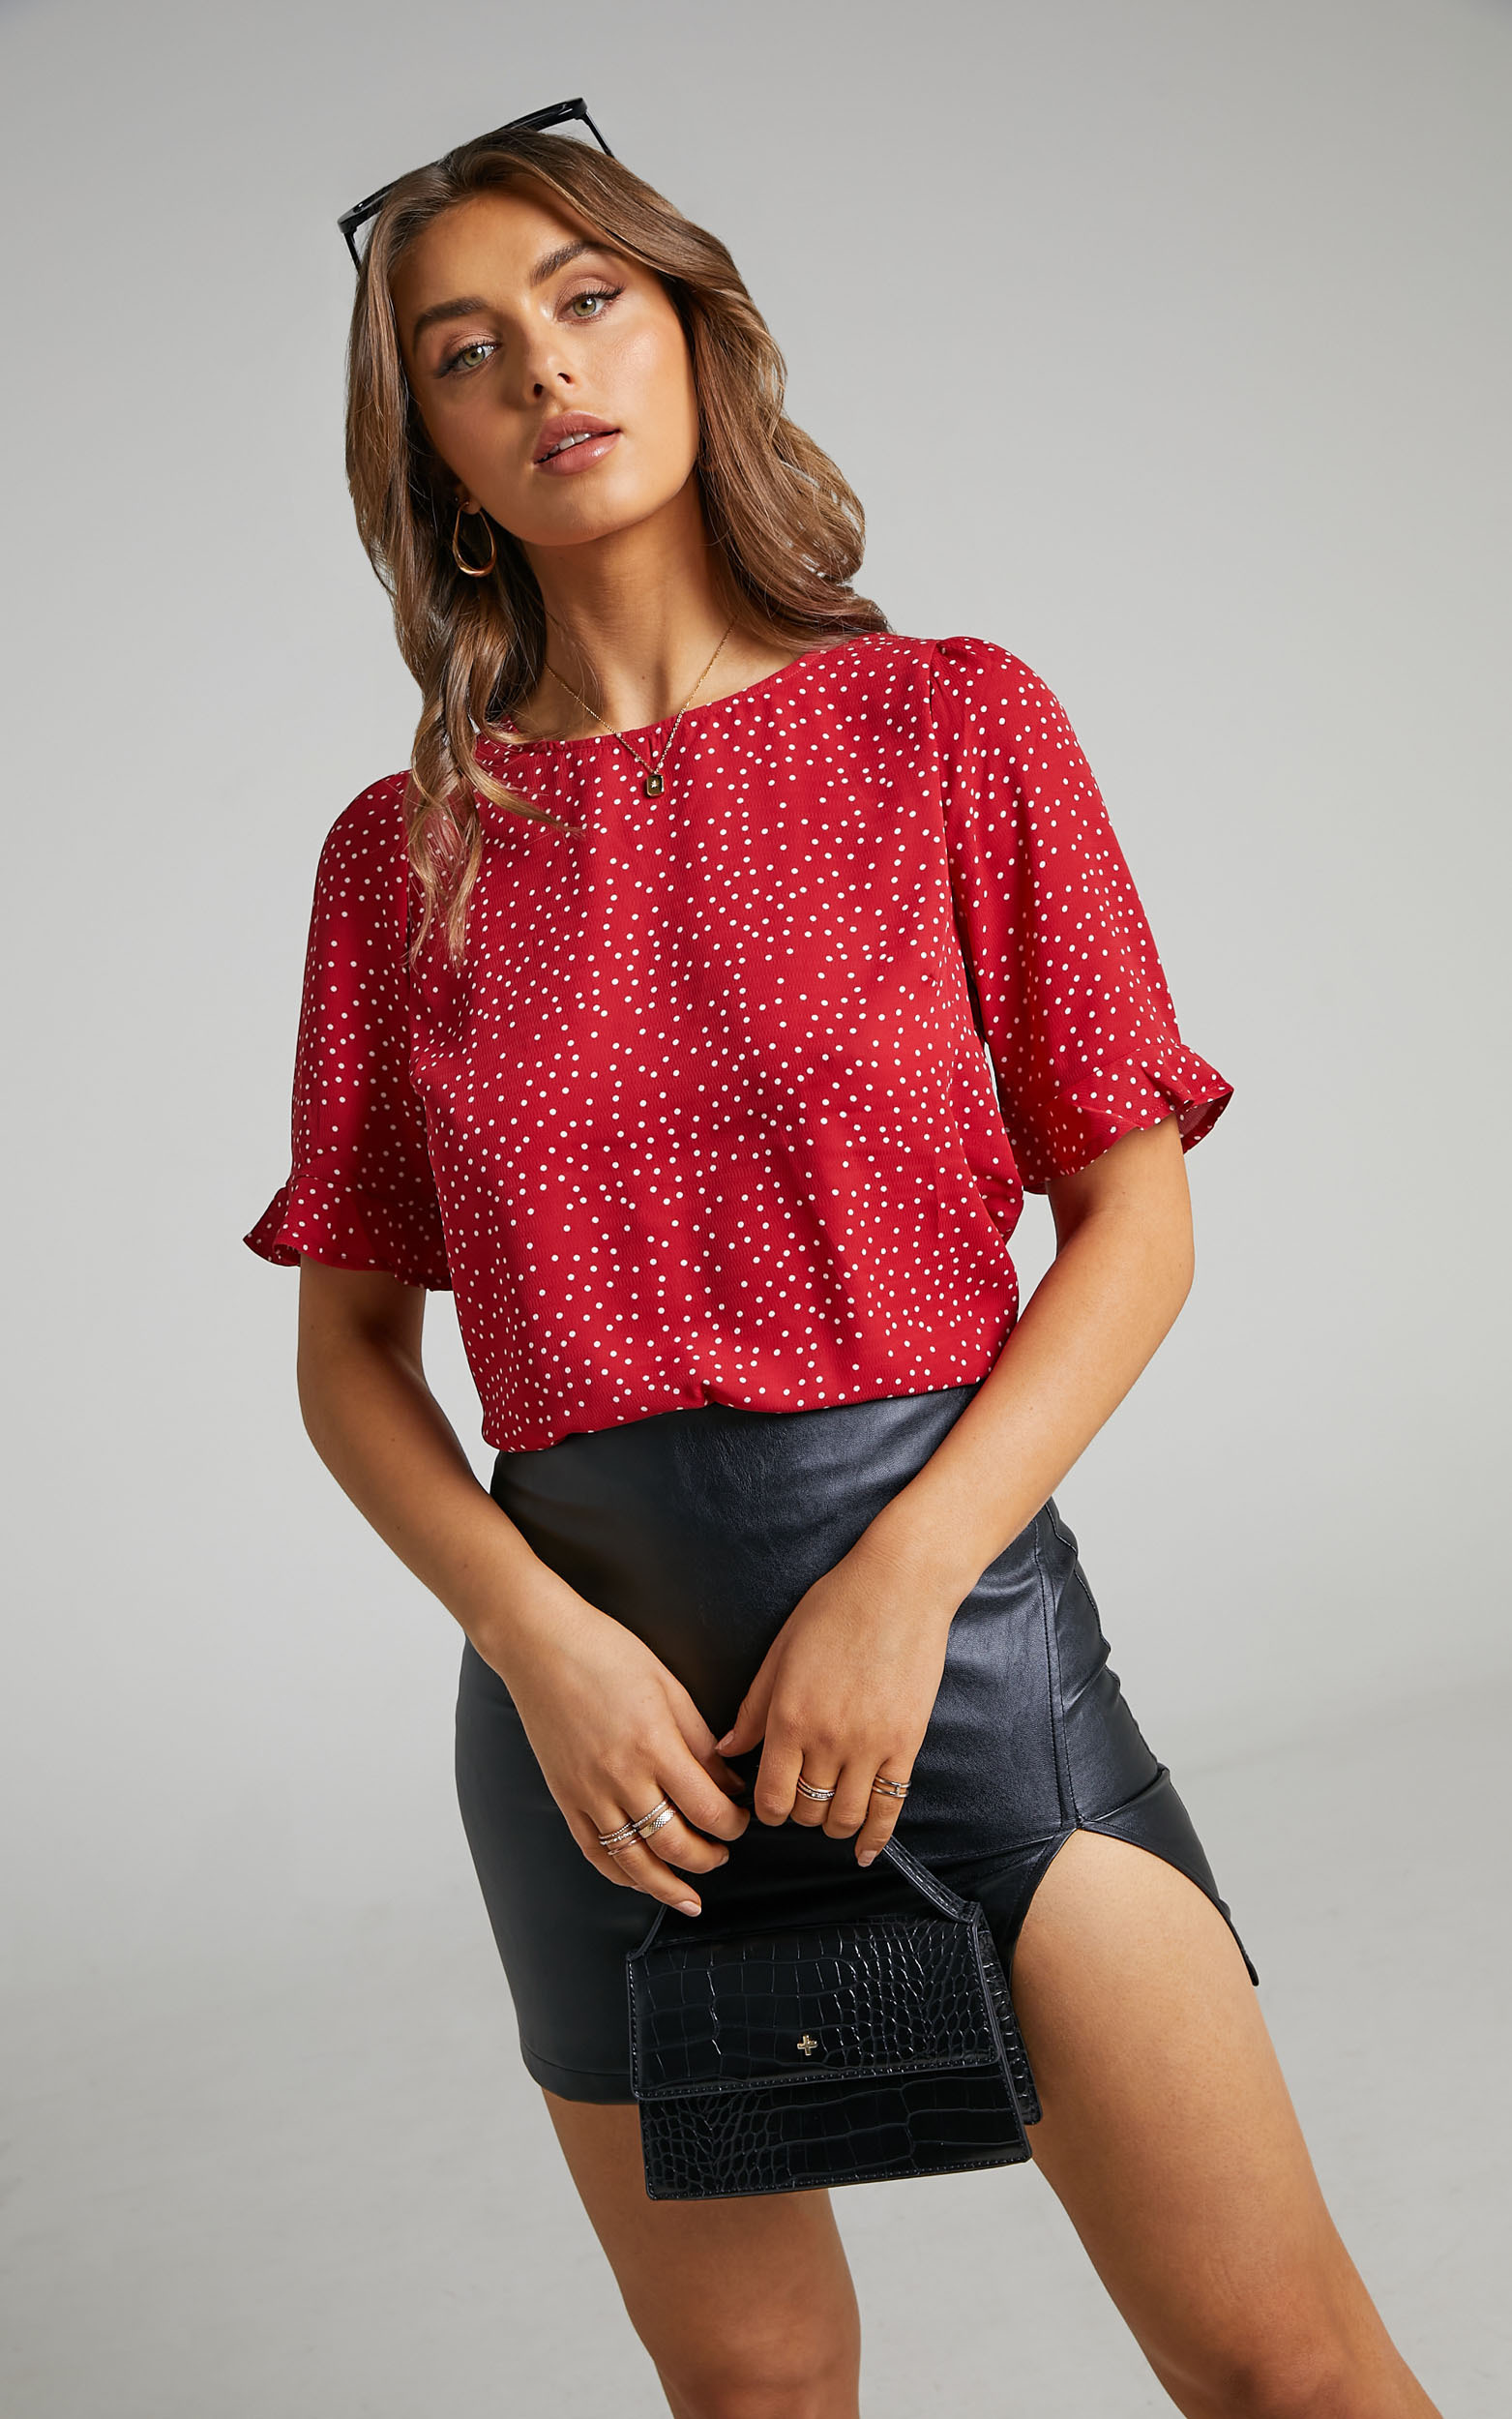 Eleanor Short Sleeve Top in Red Spot - 06, RED2, hi-res image number null